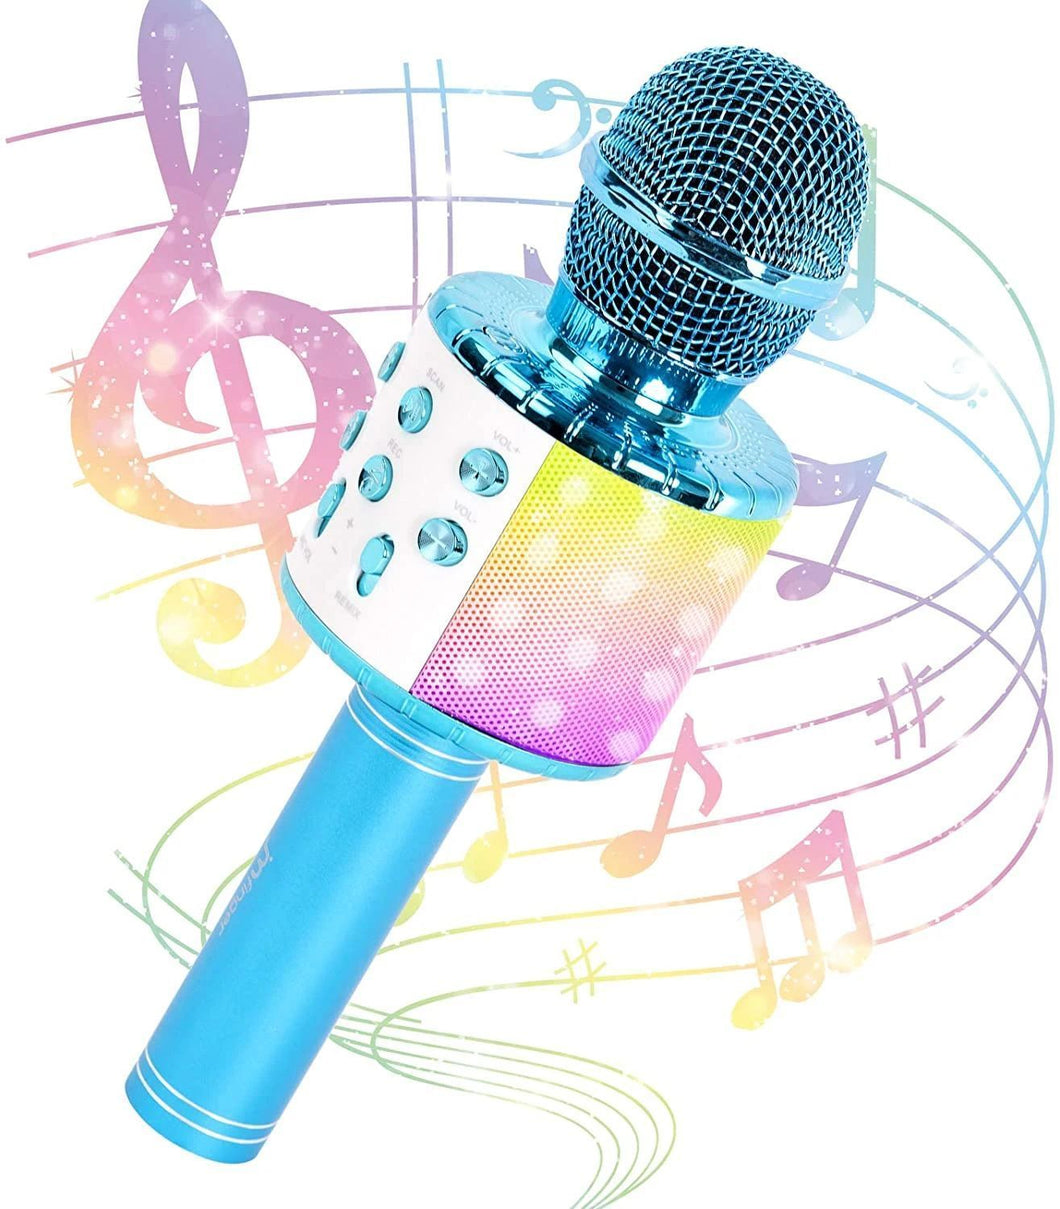 Karaoke Microphone for Kids and Adults, Wireless Portable Handheld Bluetooth Microphone with LED Lights - Best Gifts